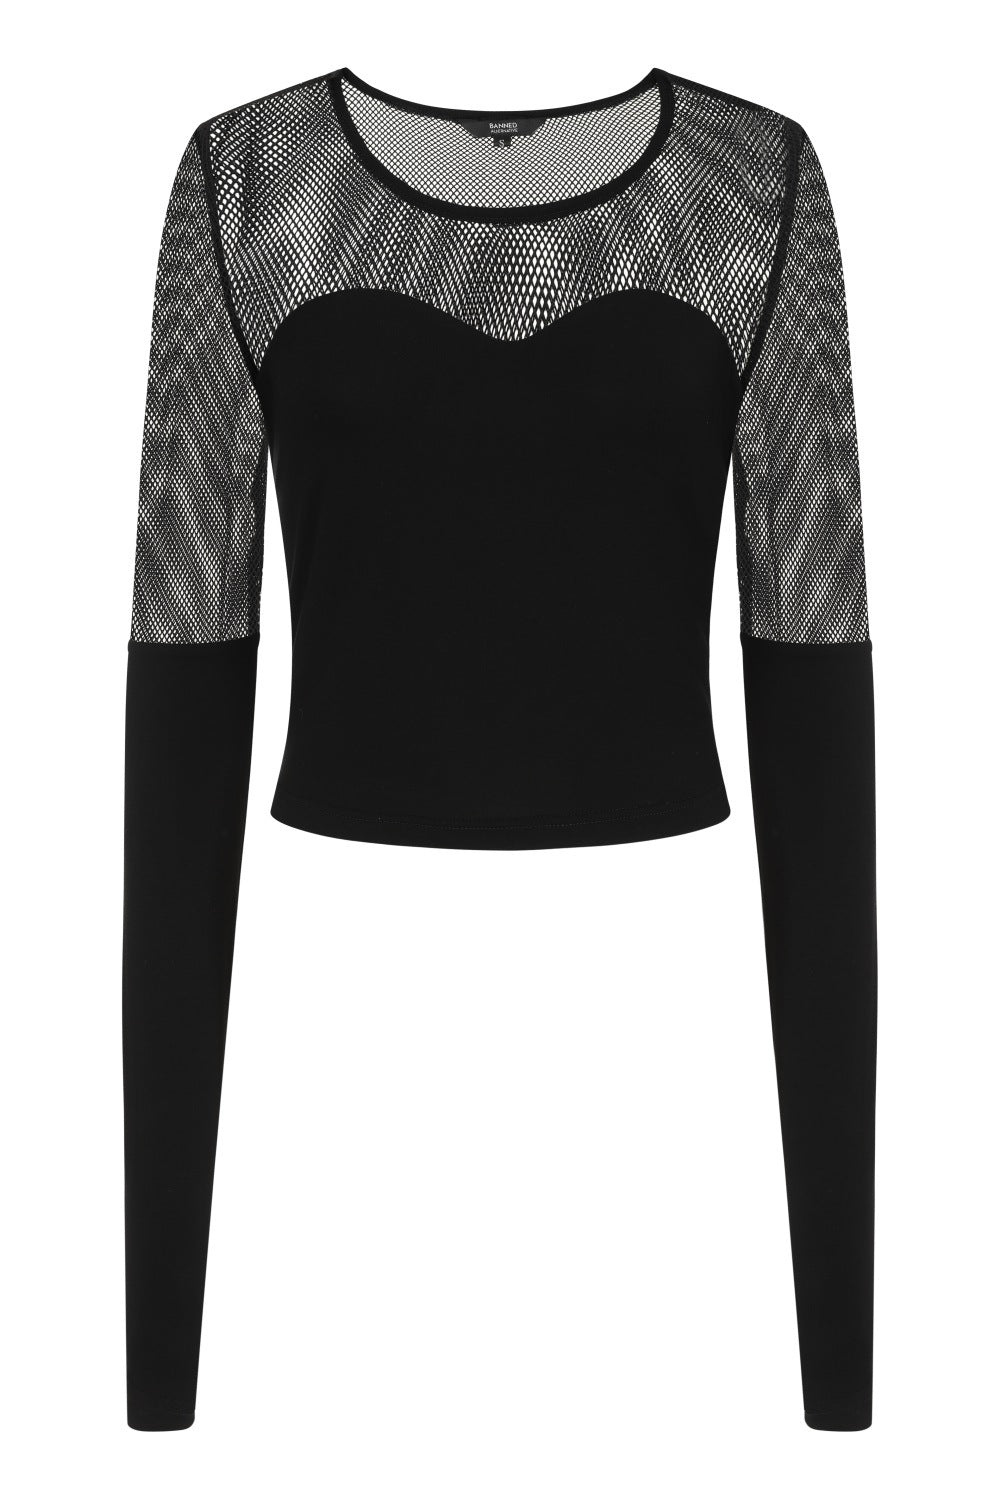 Black long sleeve top with mesh panels and thumb holes